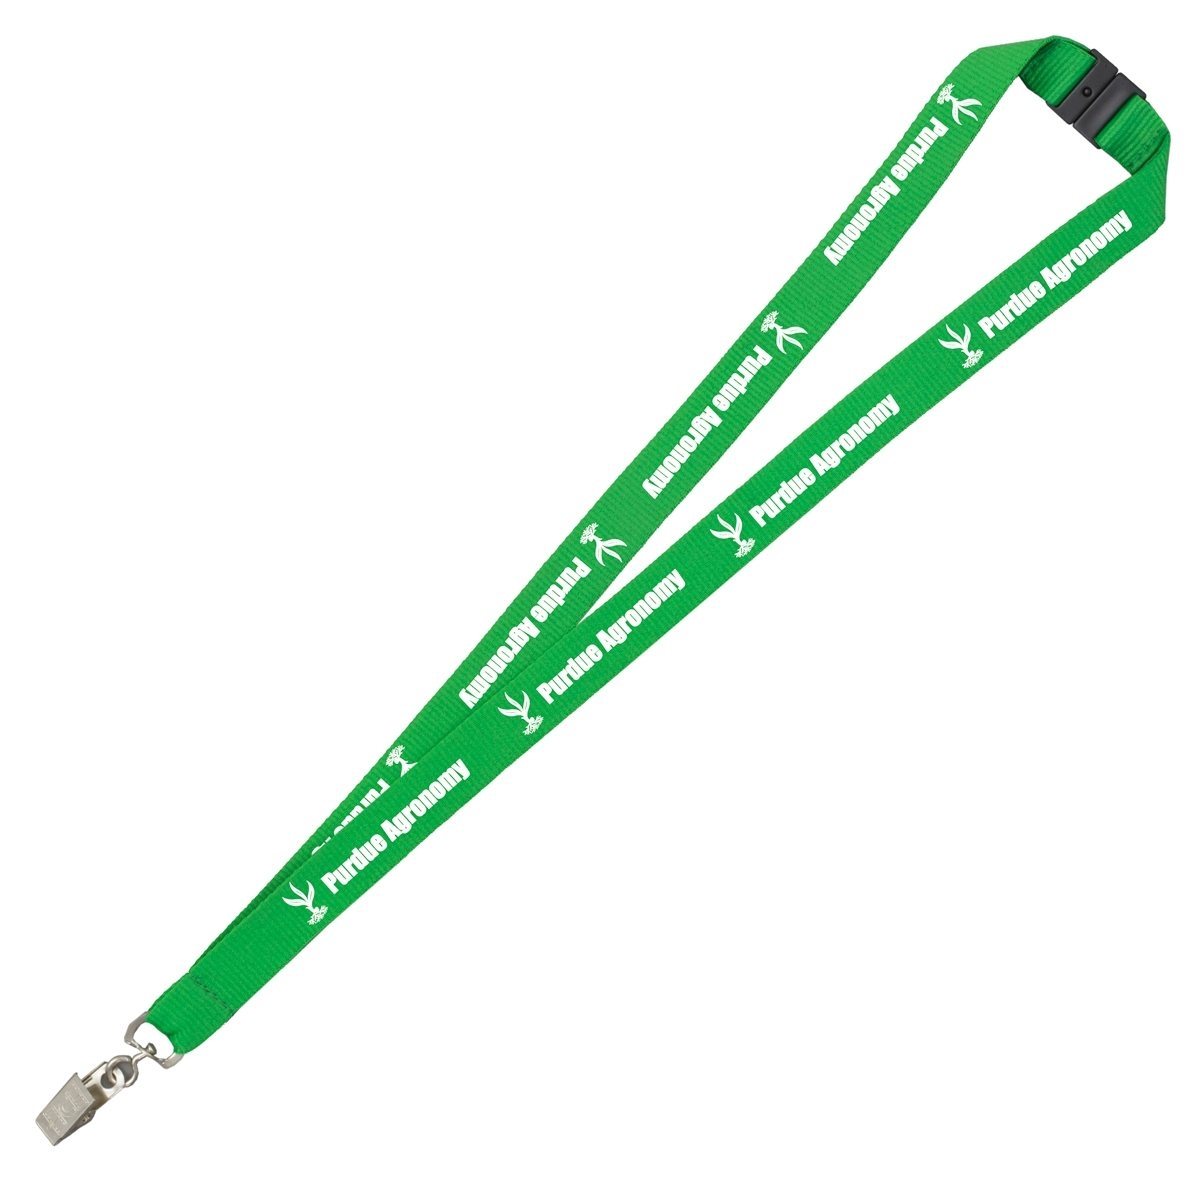 Can I order promotional lanyards for a specific event theme?